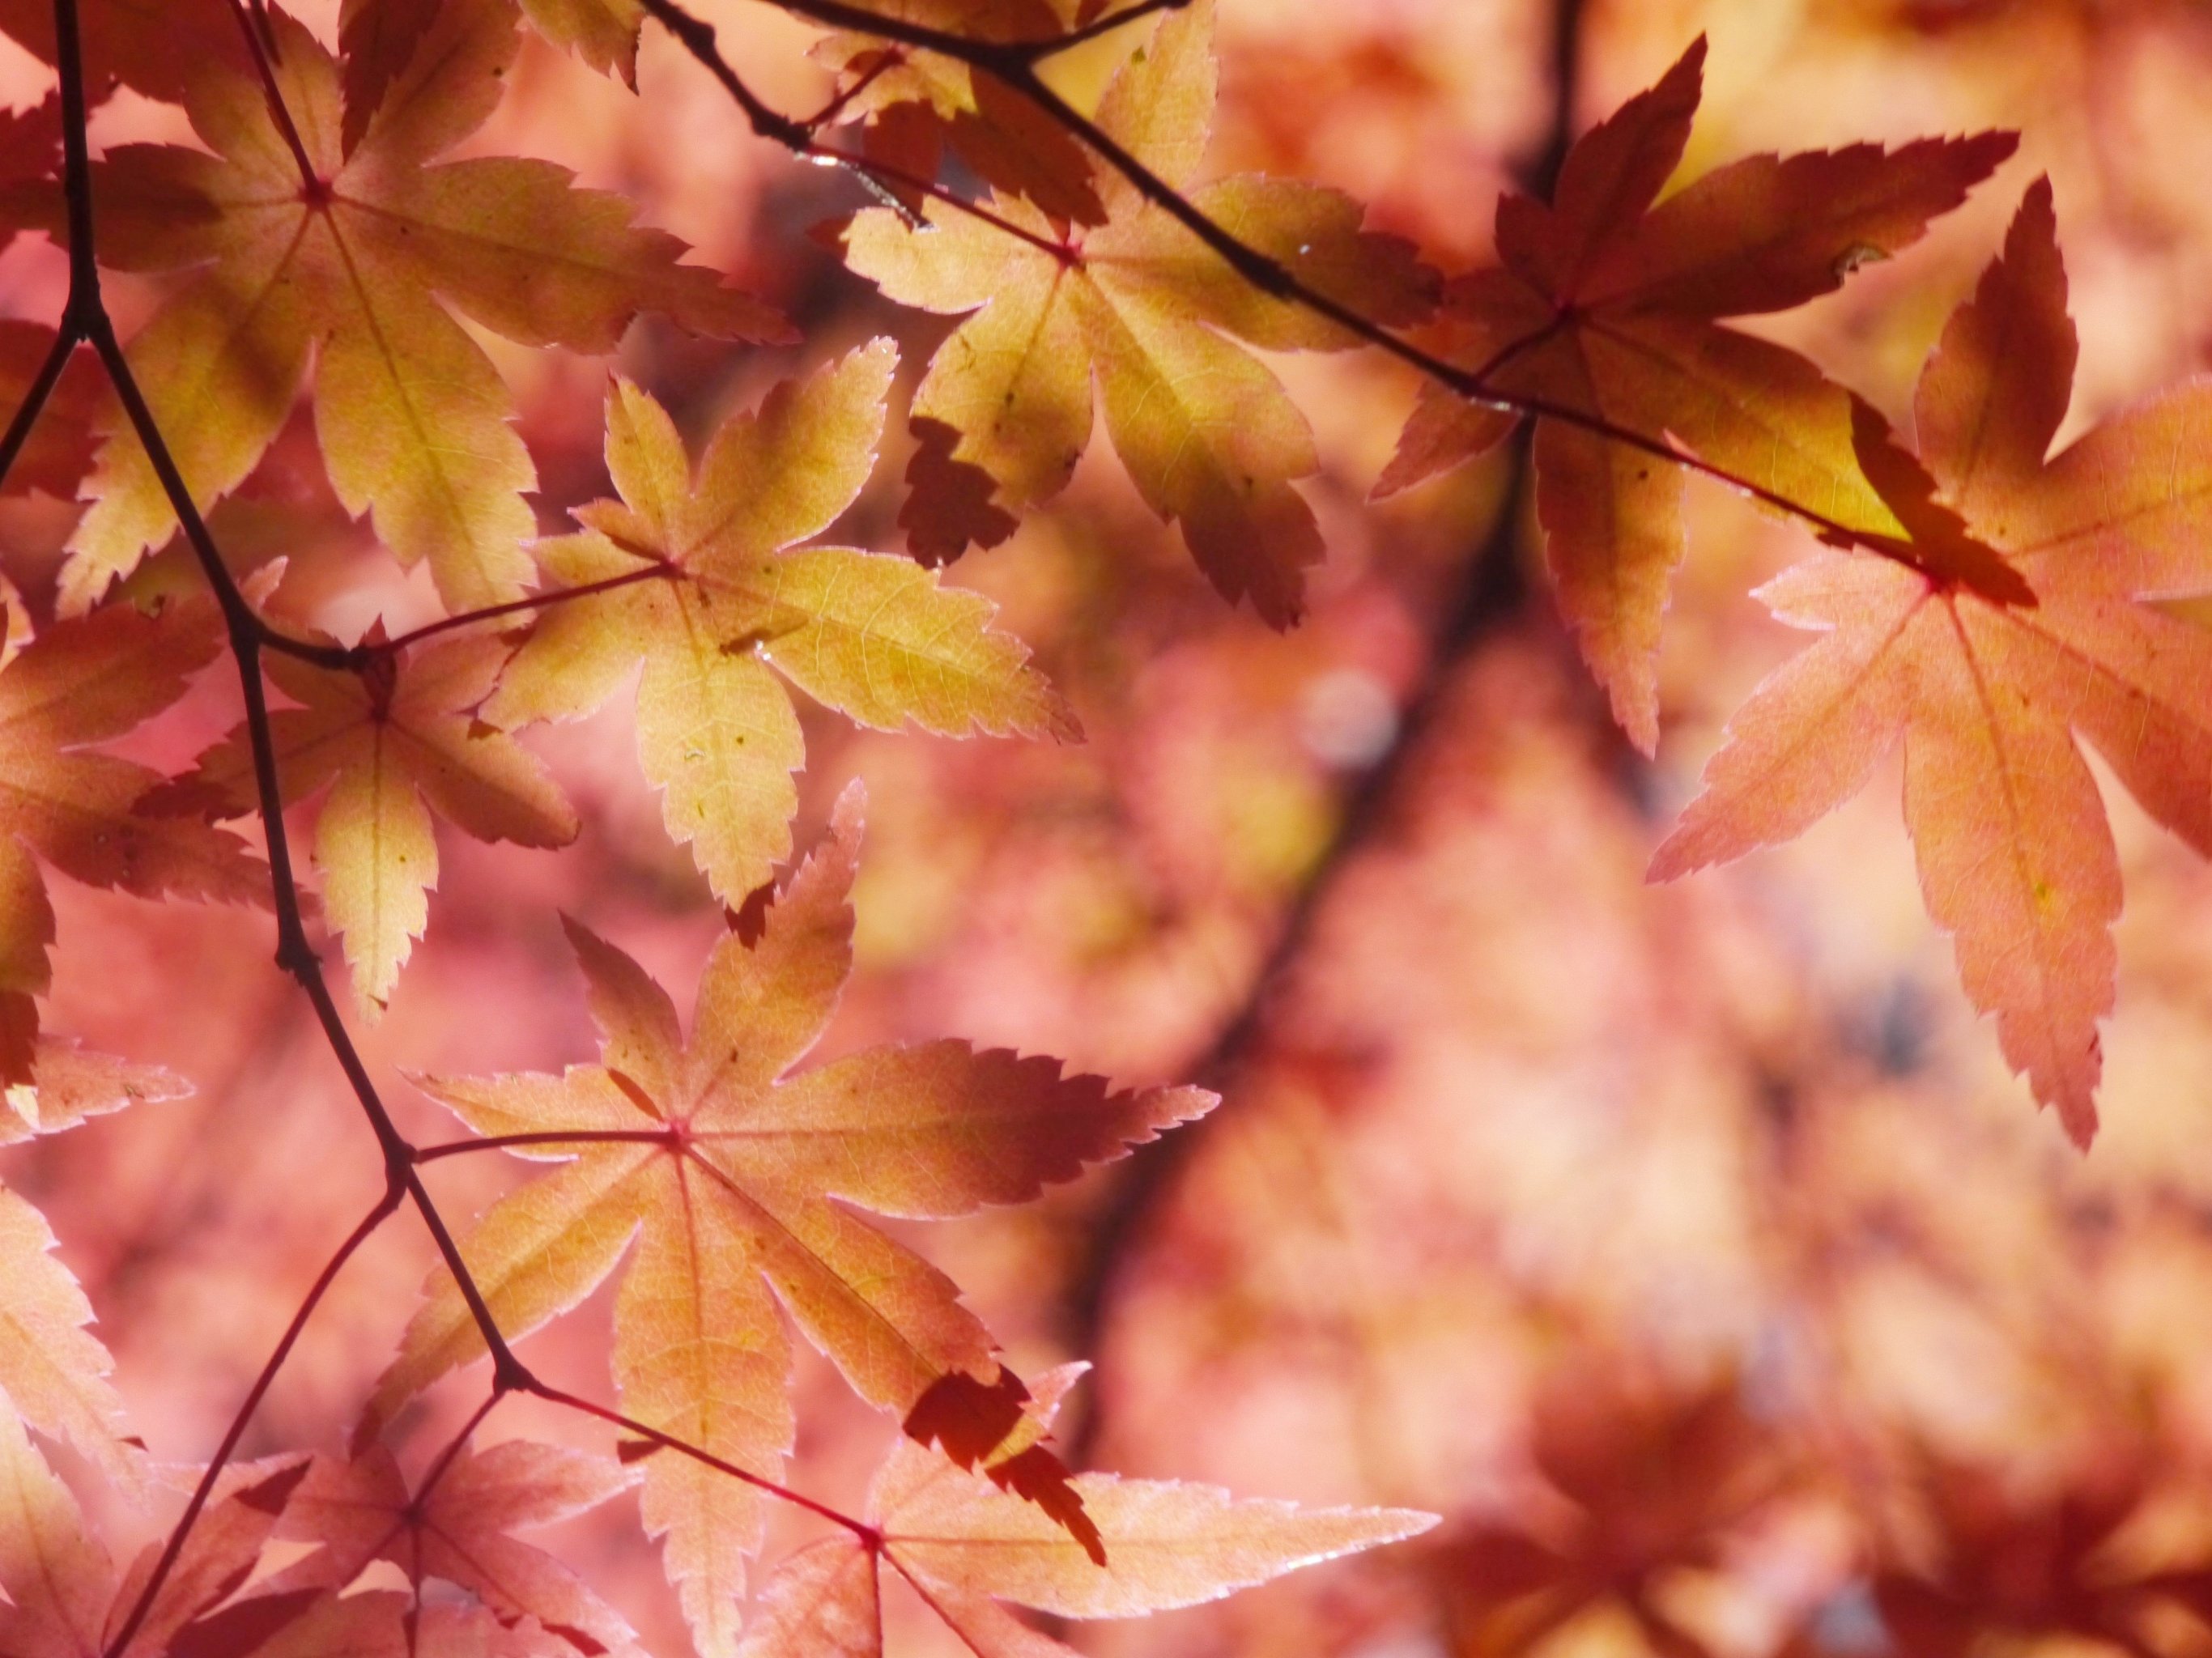 Red Maple Leaves Wallpaper - iPhone, Android & Desktop Backgrounds